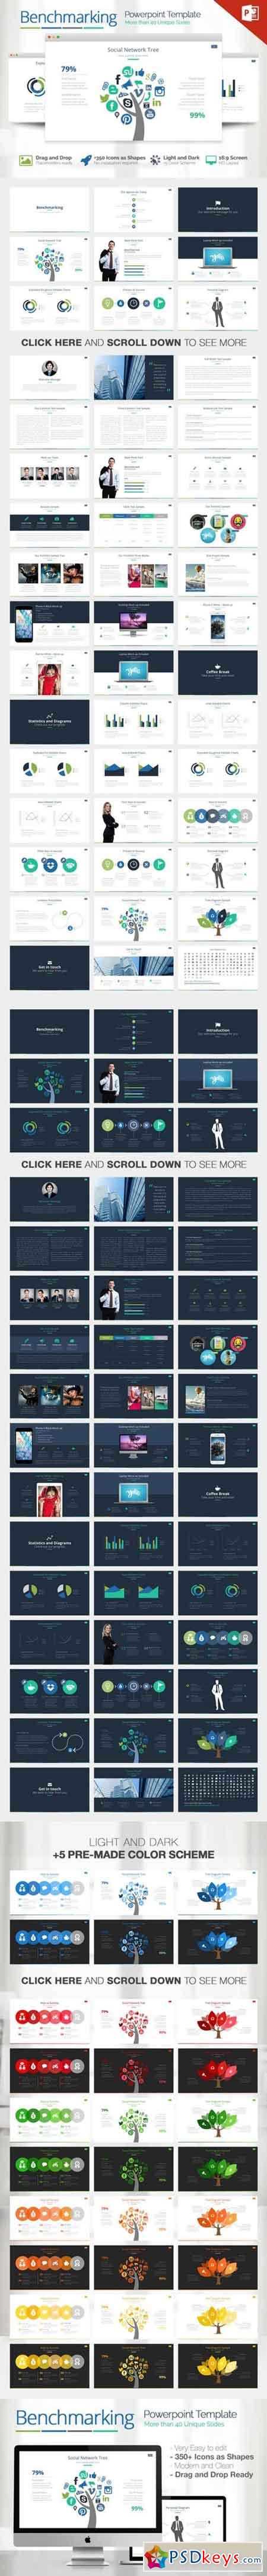 Benchmarking PowerPoint Template 5148531